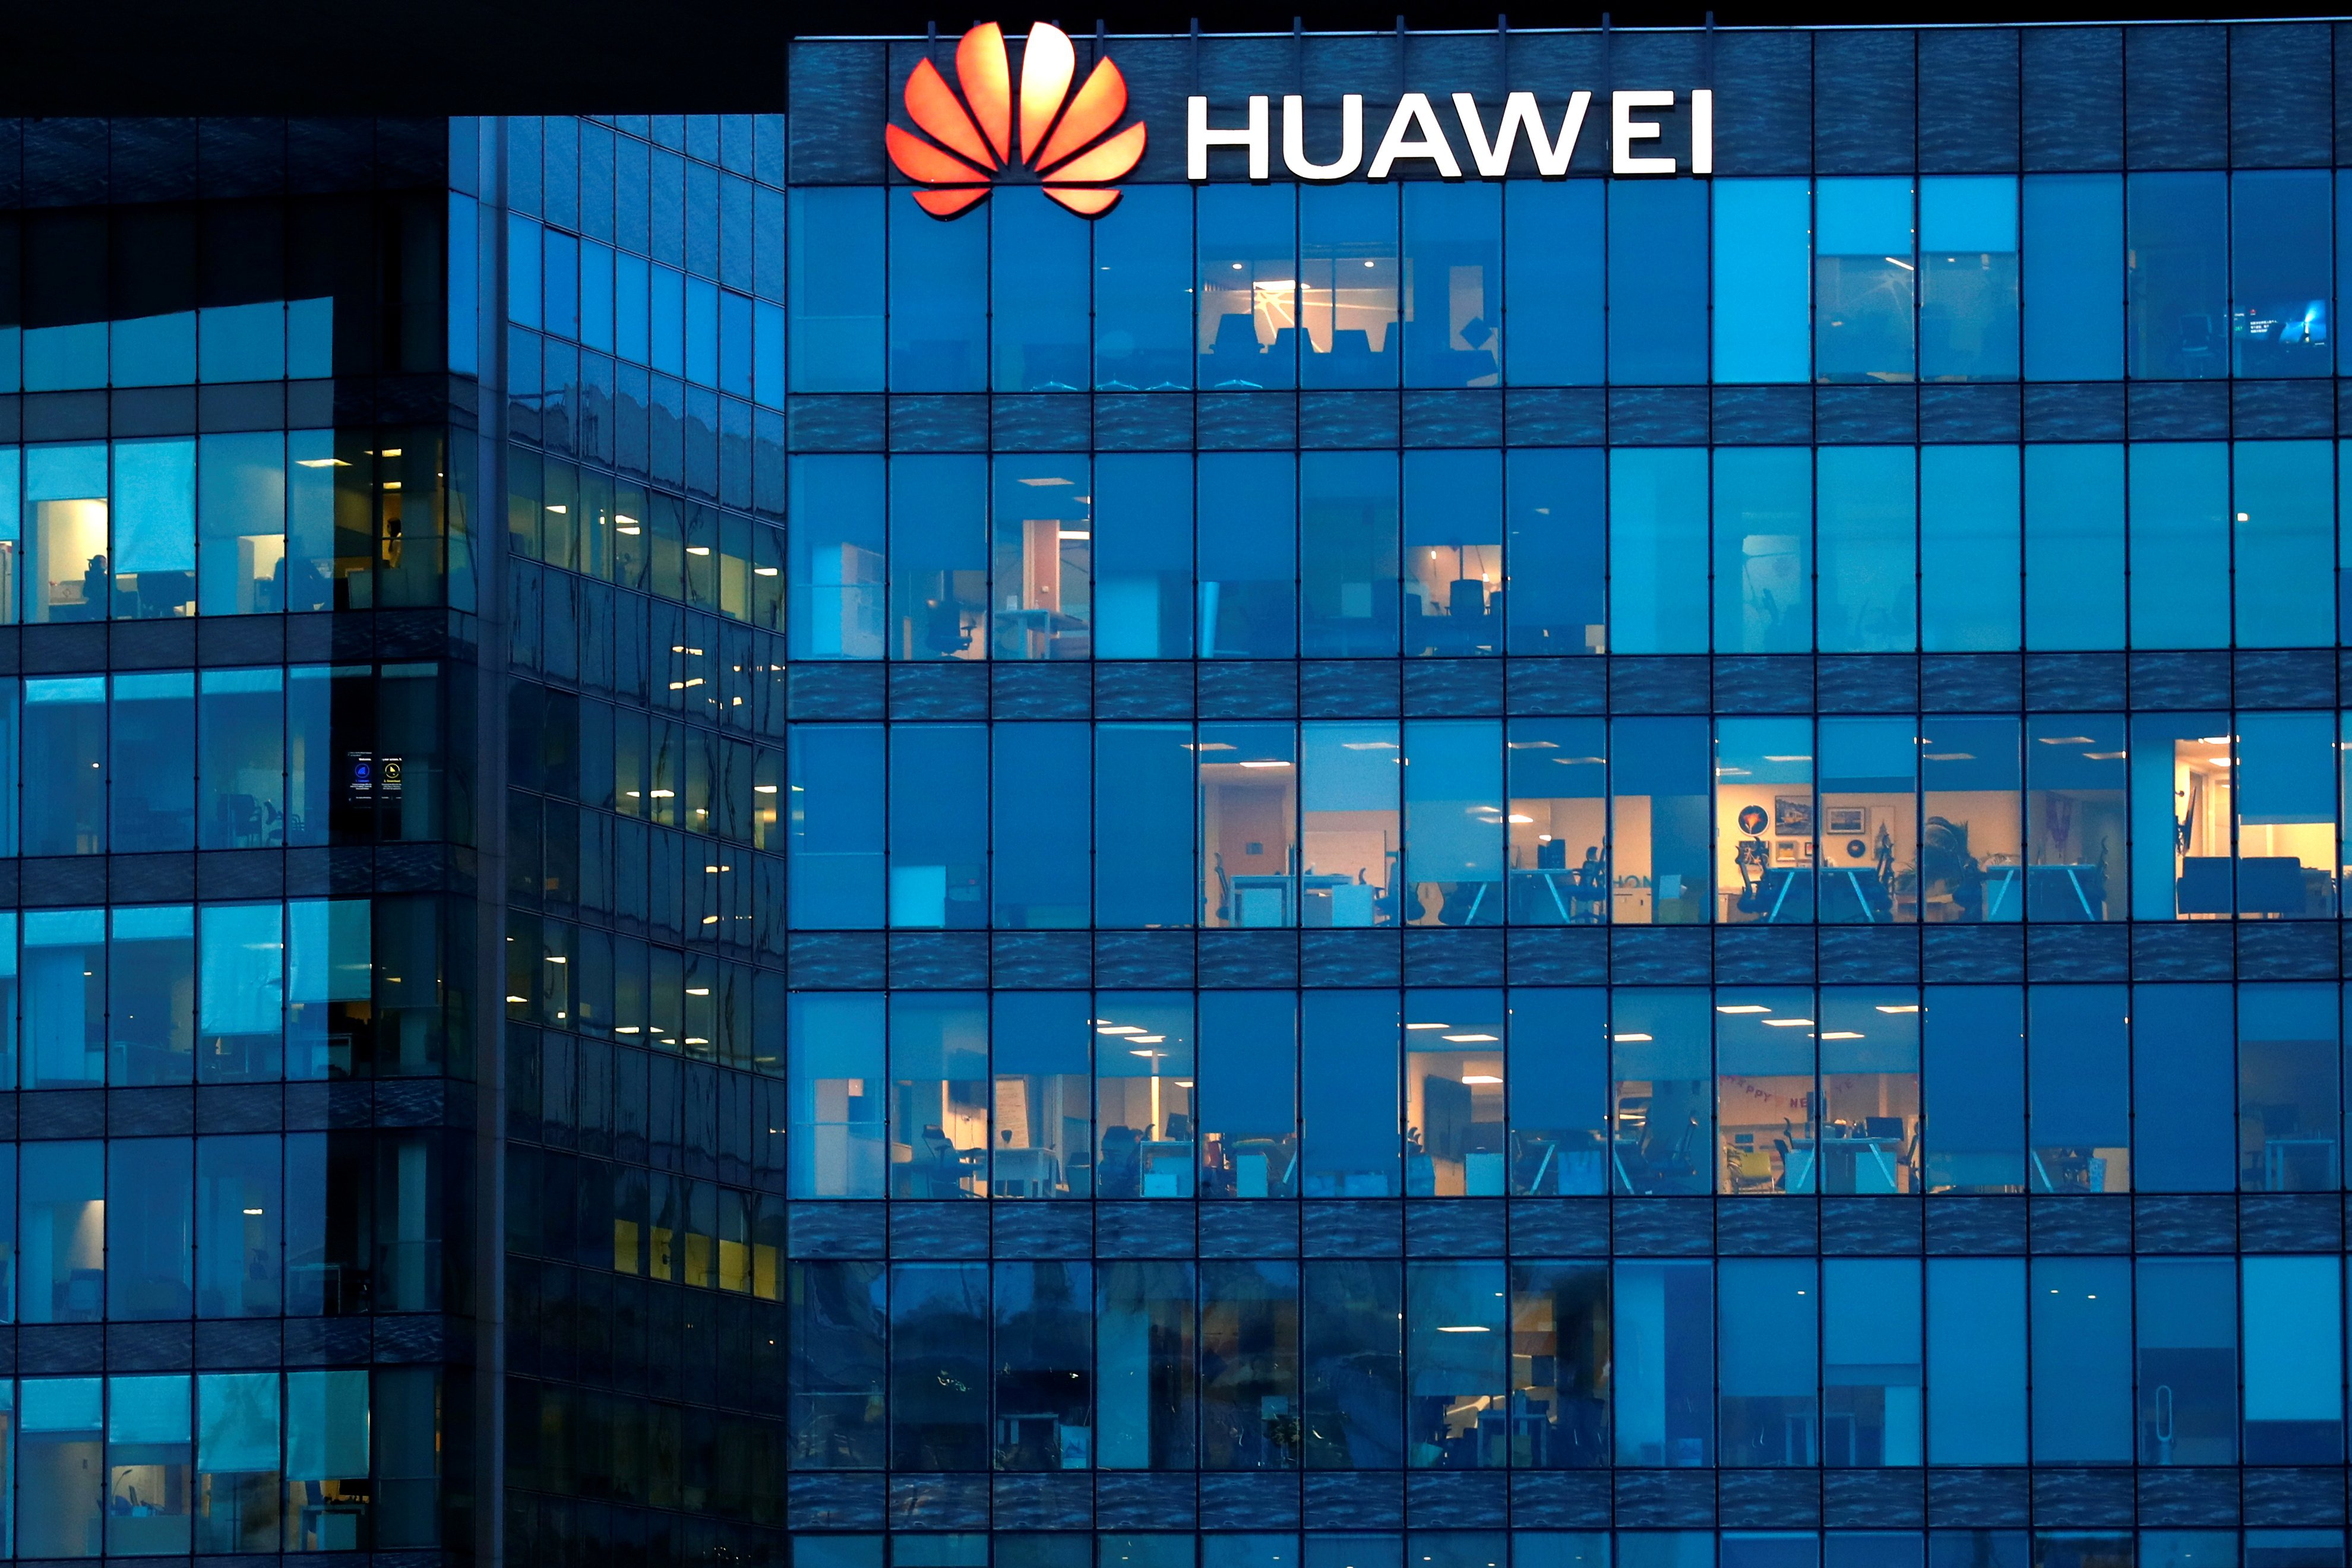 The French headquarters of Huawei Technologies in Boulogne-Billancourt near Paris. Photo: Reuters